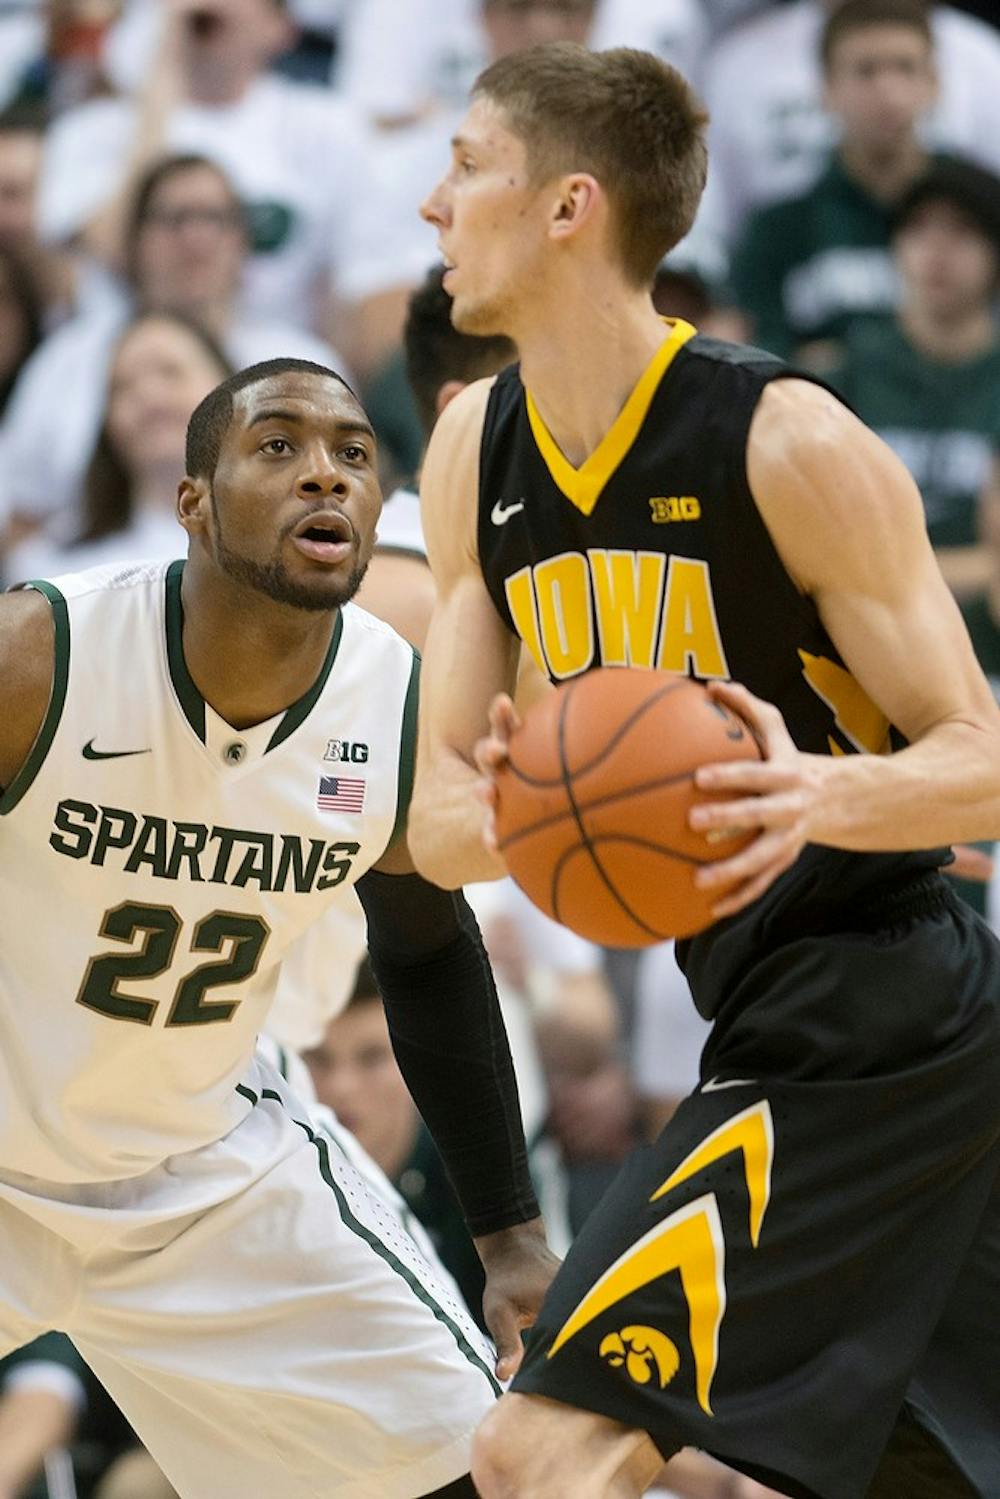 <p>Junior guard/forward Branden Dawson guards Iowa forward Jarrod Uthoff on March 6, 2014, at Breslin Center during the game against Iowa. The Spartans defeated the Hawkeyes, 86-76. Julia Nagy/The State News</p>